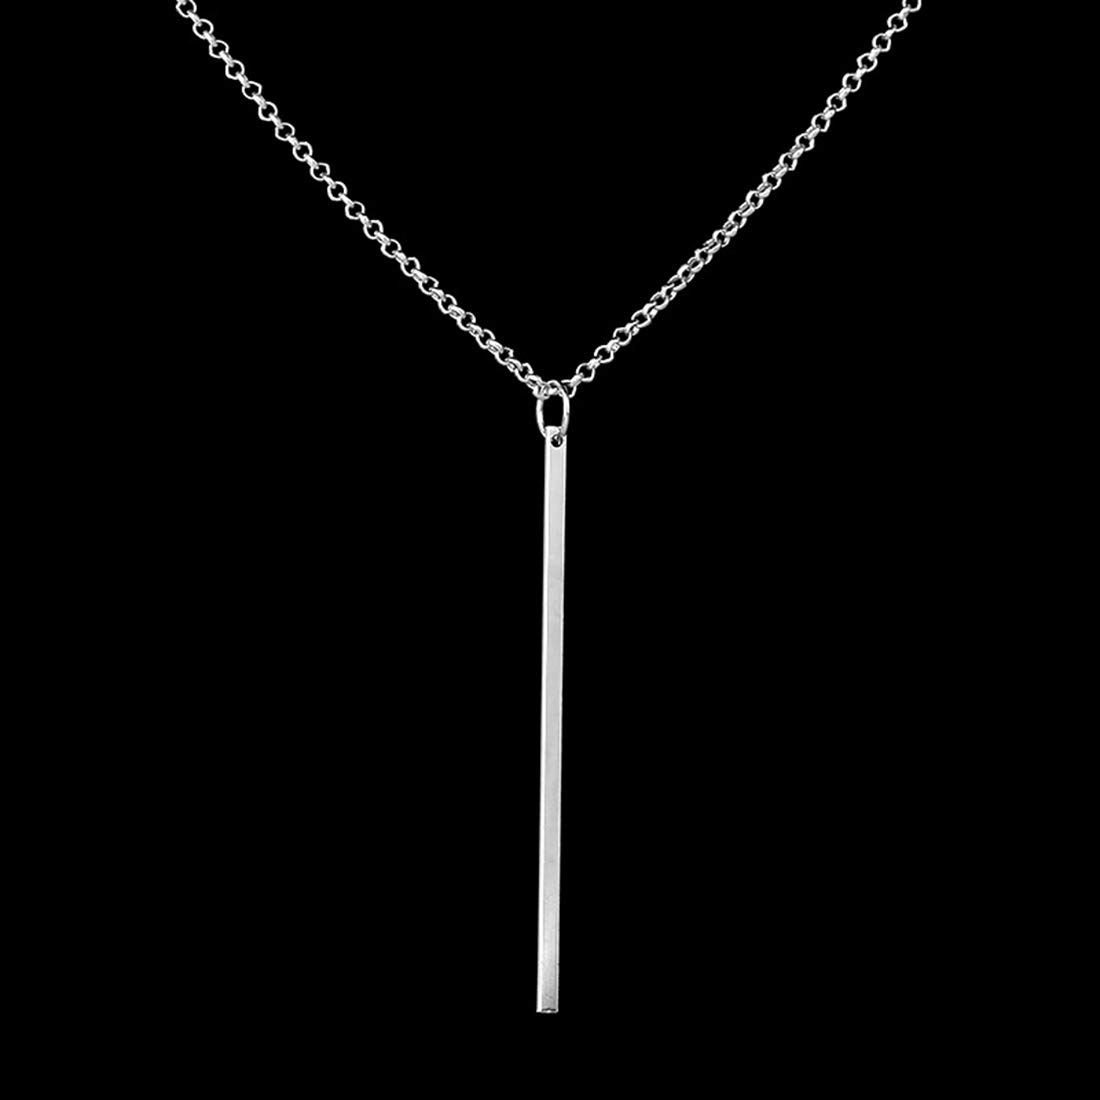 Metisee Vertical Bar Pendent Necklace Silver Decorative Long Necklaces Chain Prom Jewelry for Women and Girls (Silver)